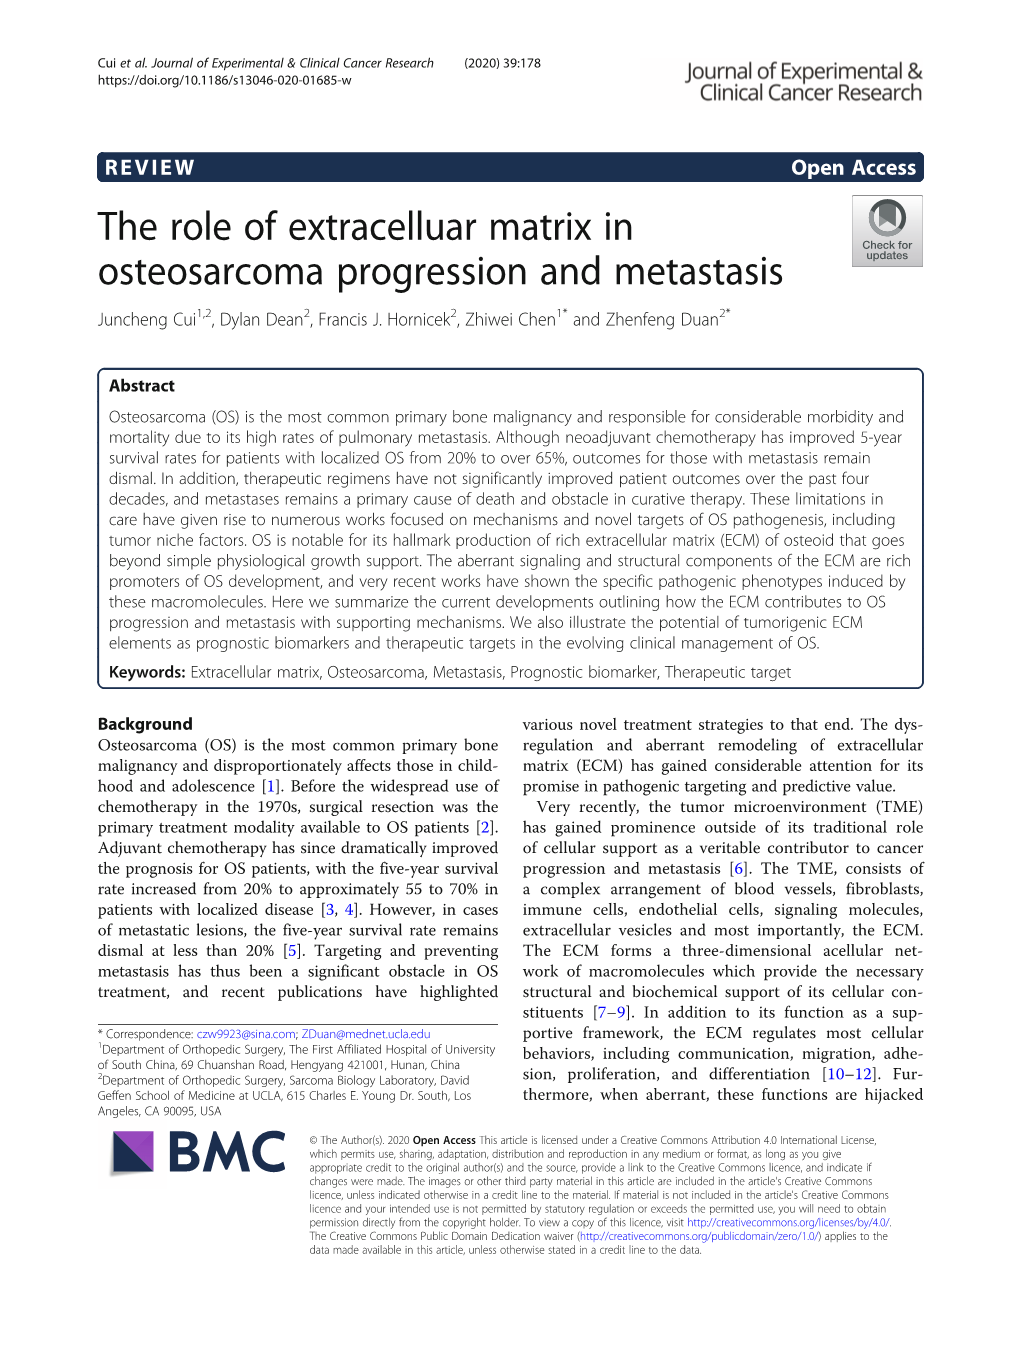 The Role of Extracelluar Matrix in Osteosarcoma Progression and Metastasis Juncheng Cui1,2, Dylan Dean2, Francis J